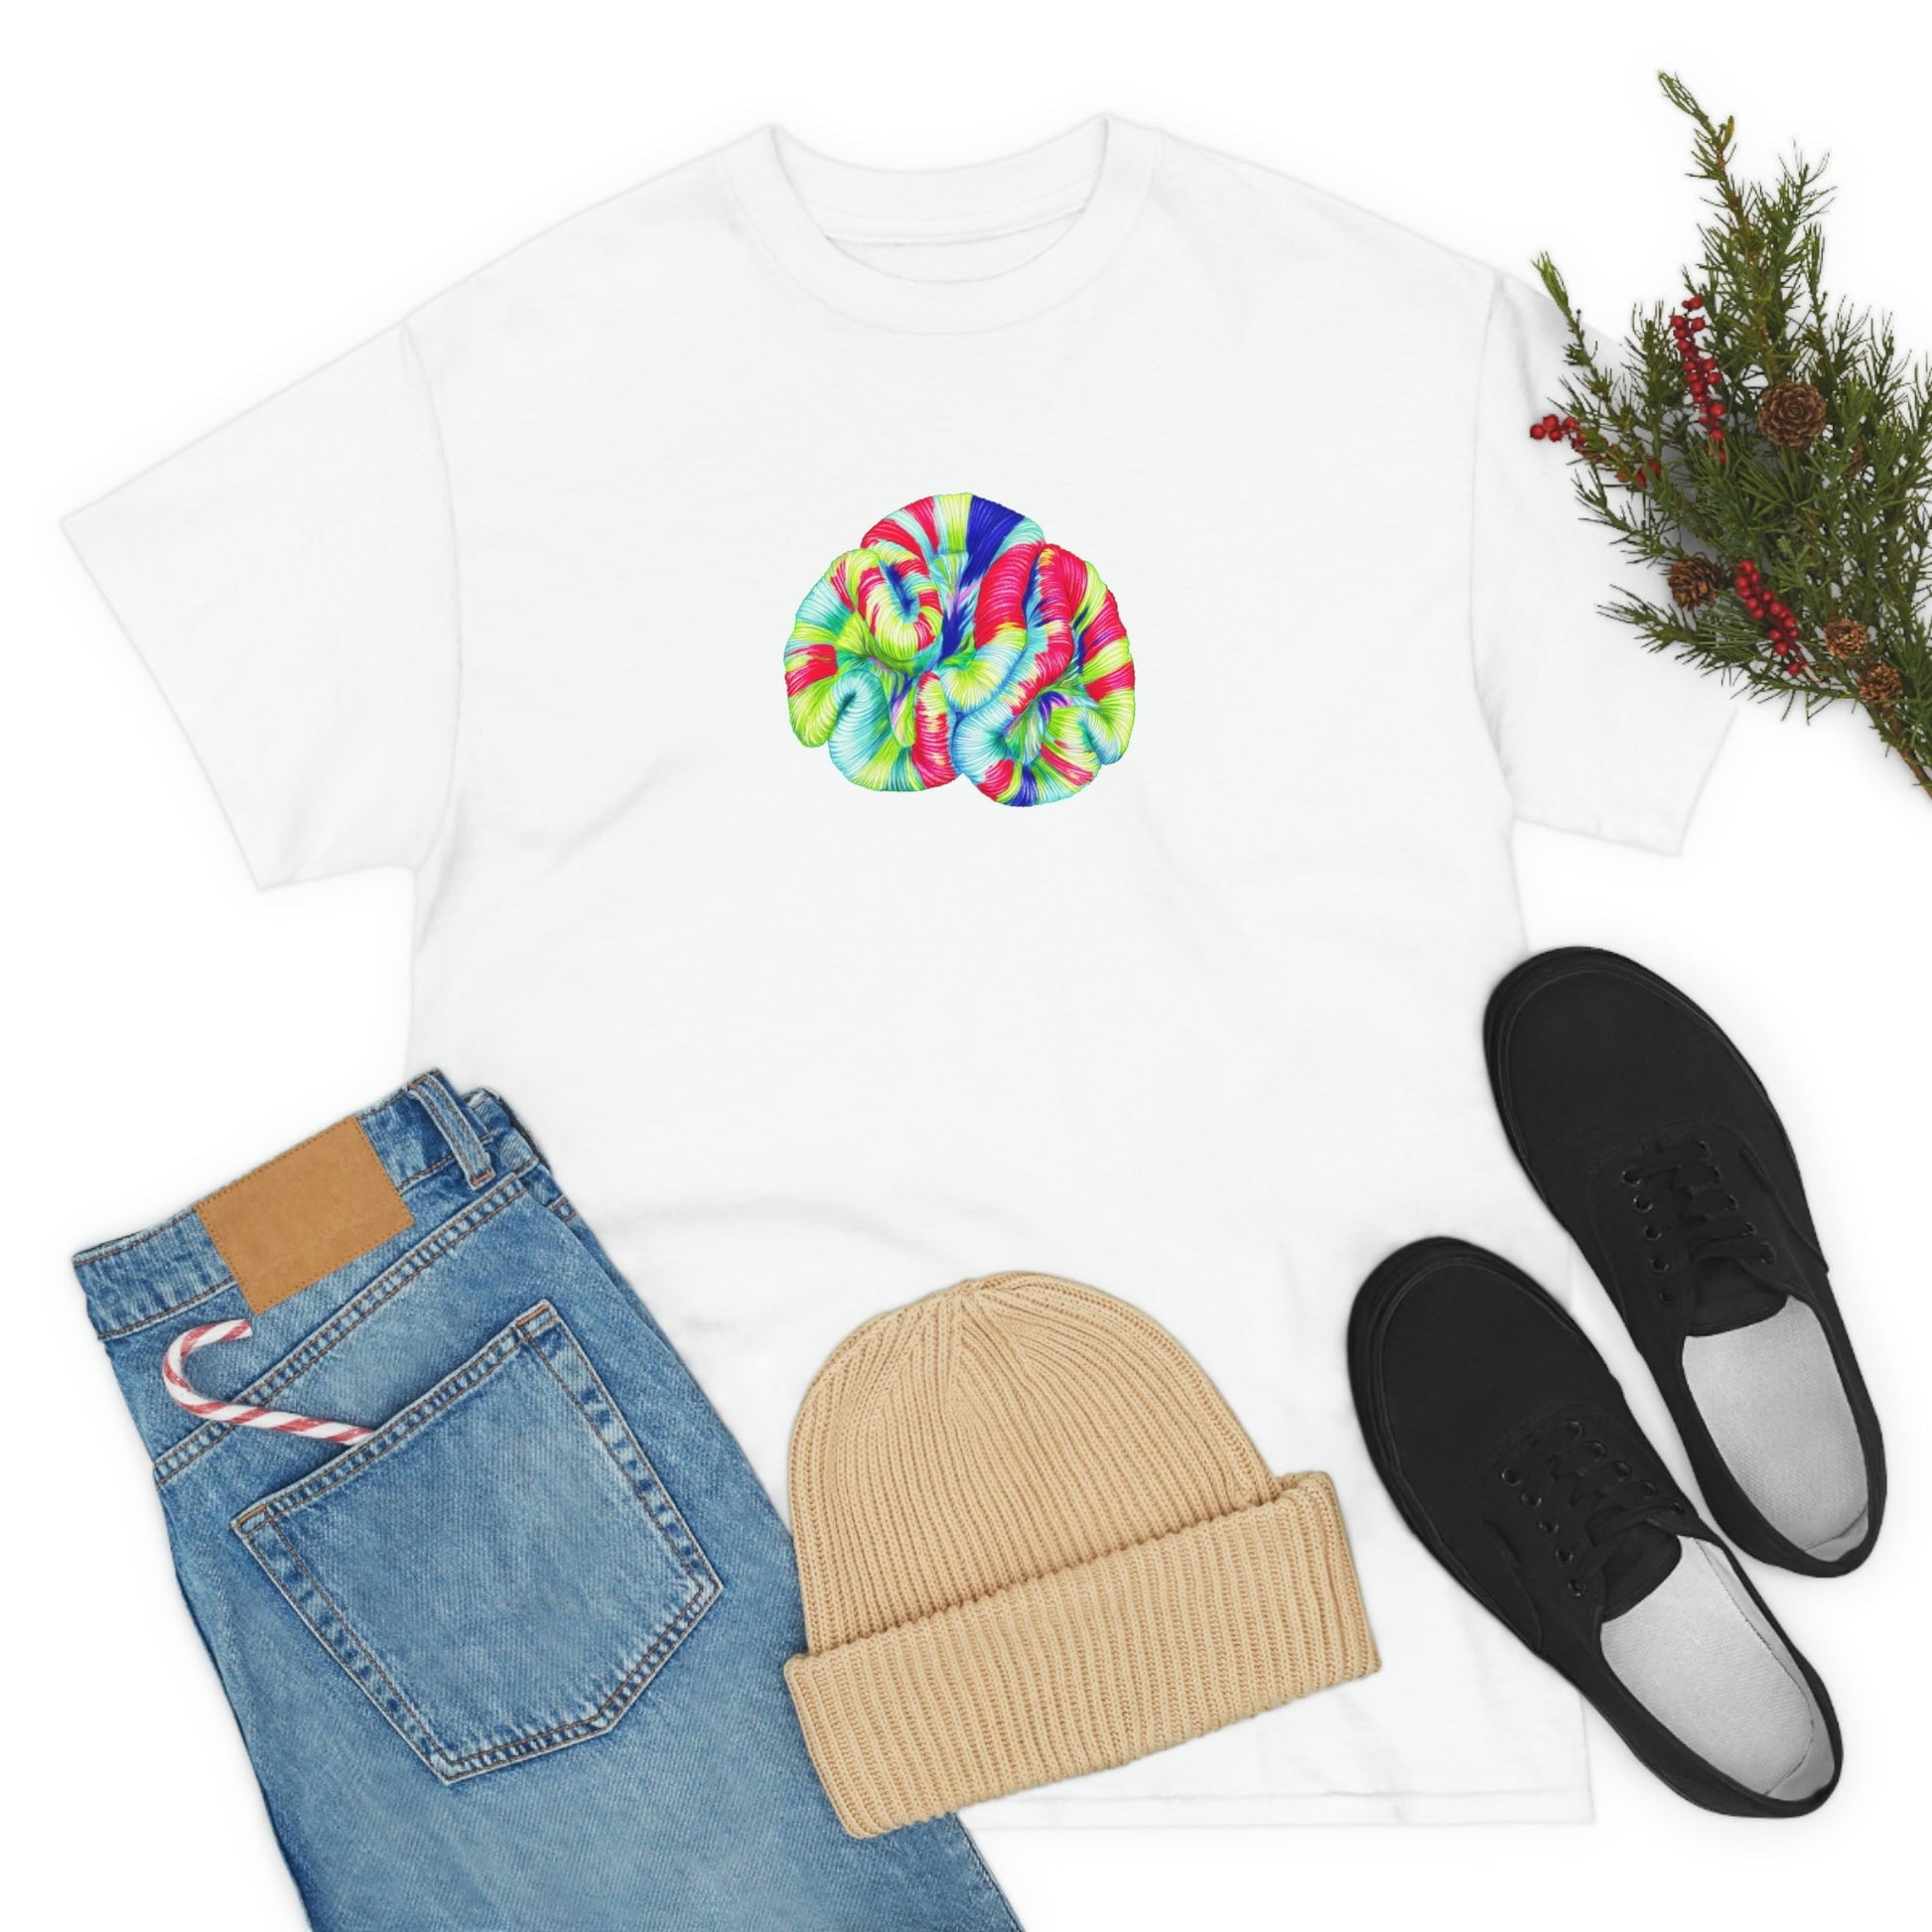 Simple Trachyphyllia Coral Shirt - Reef of Clowns